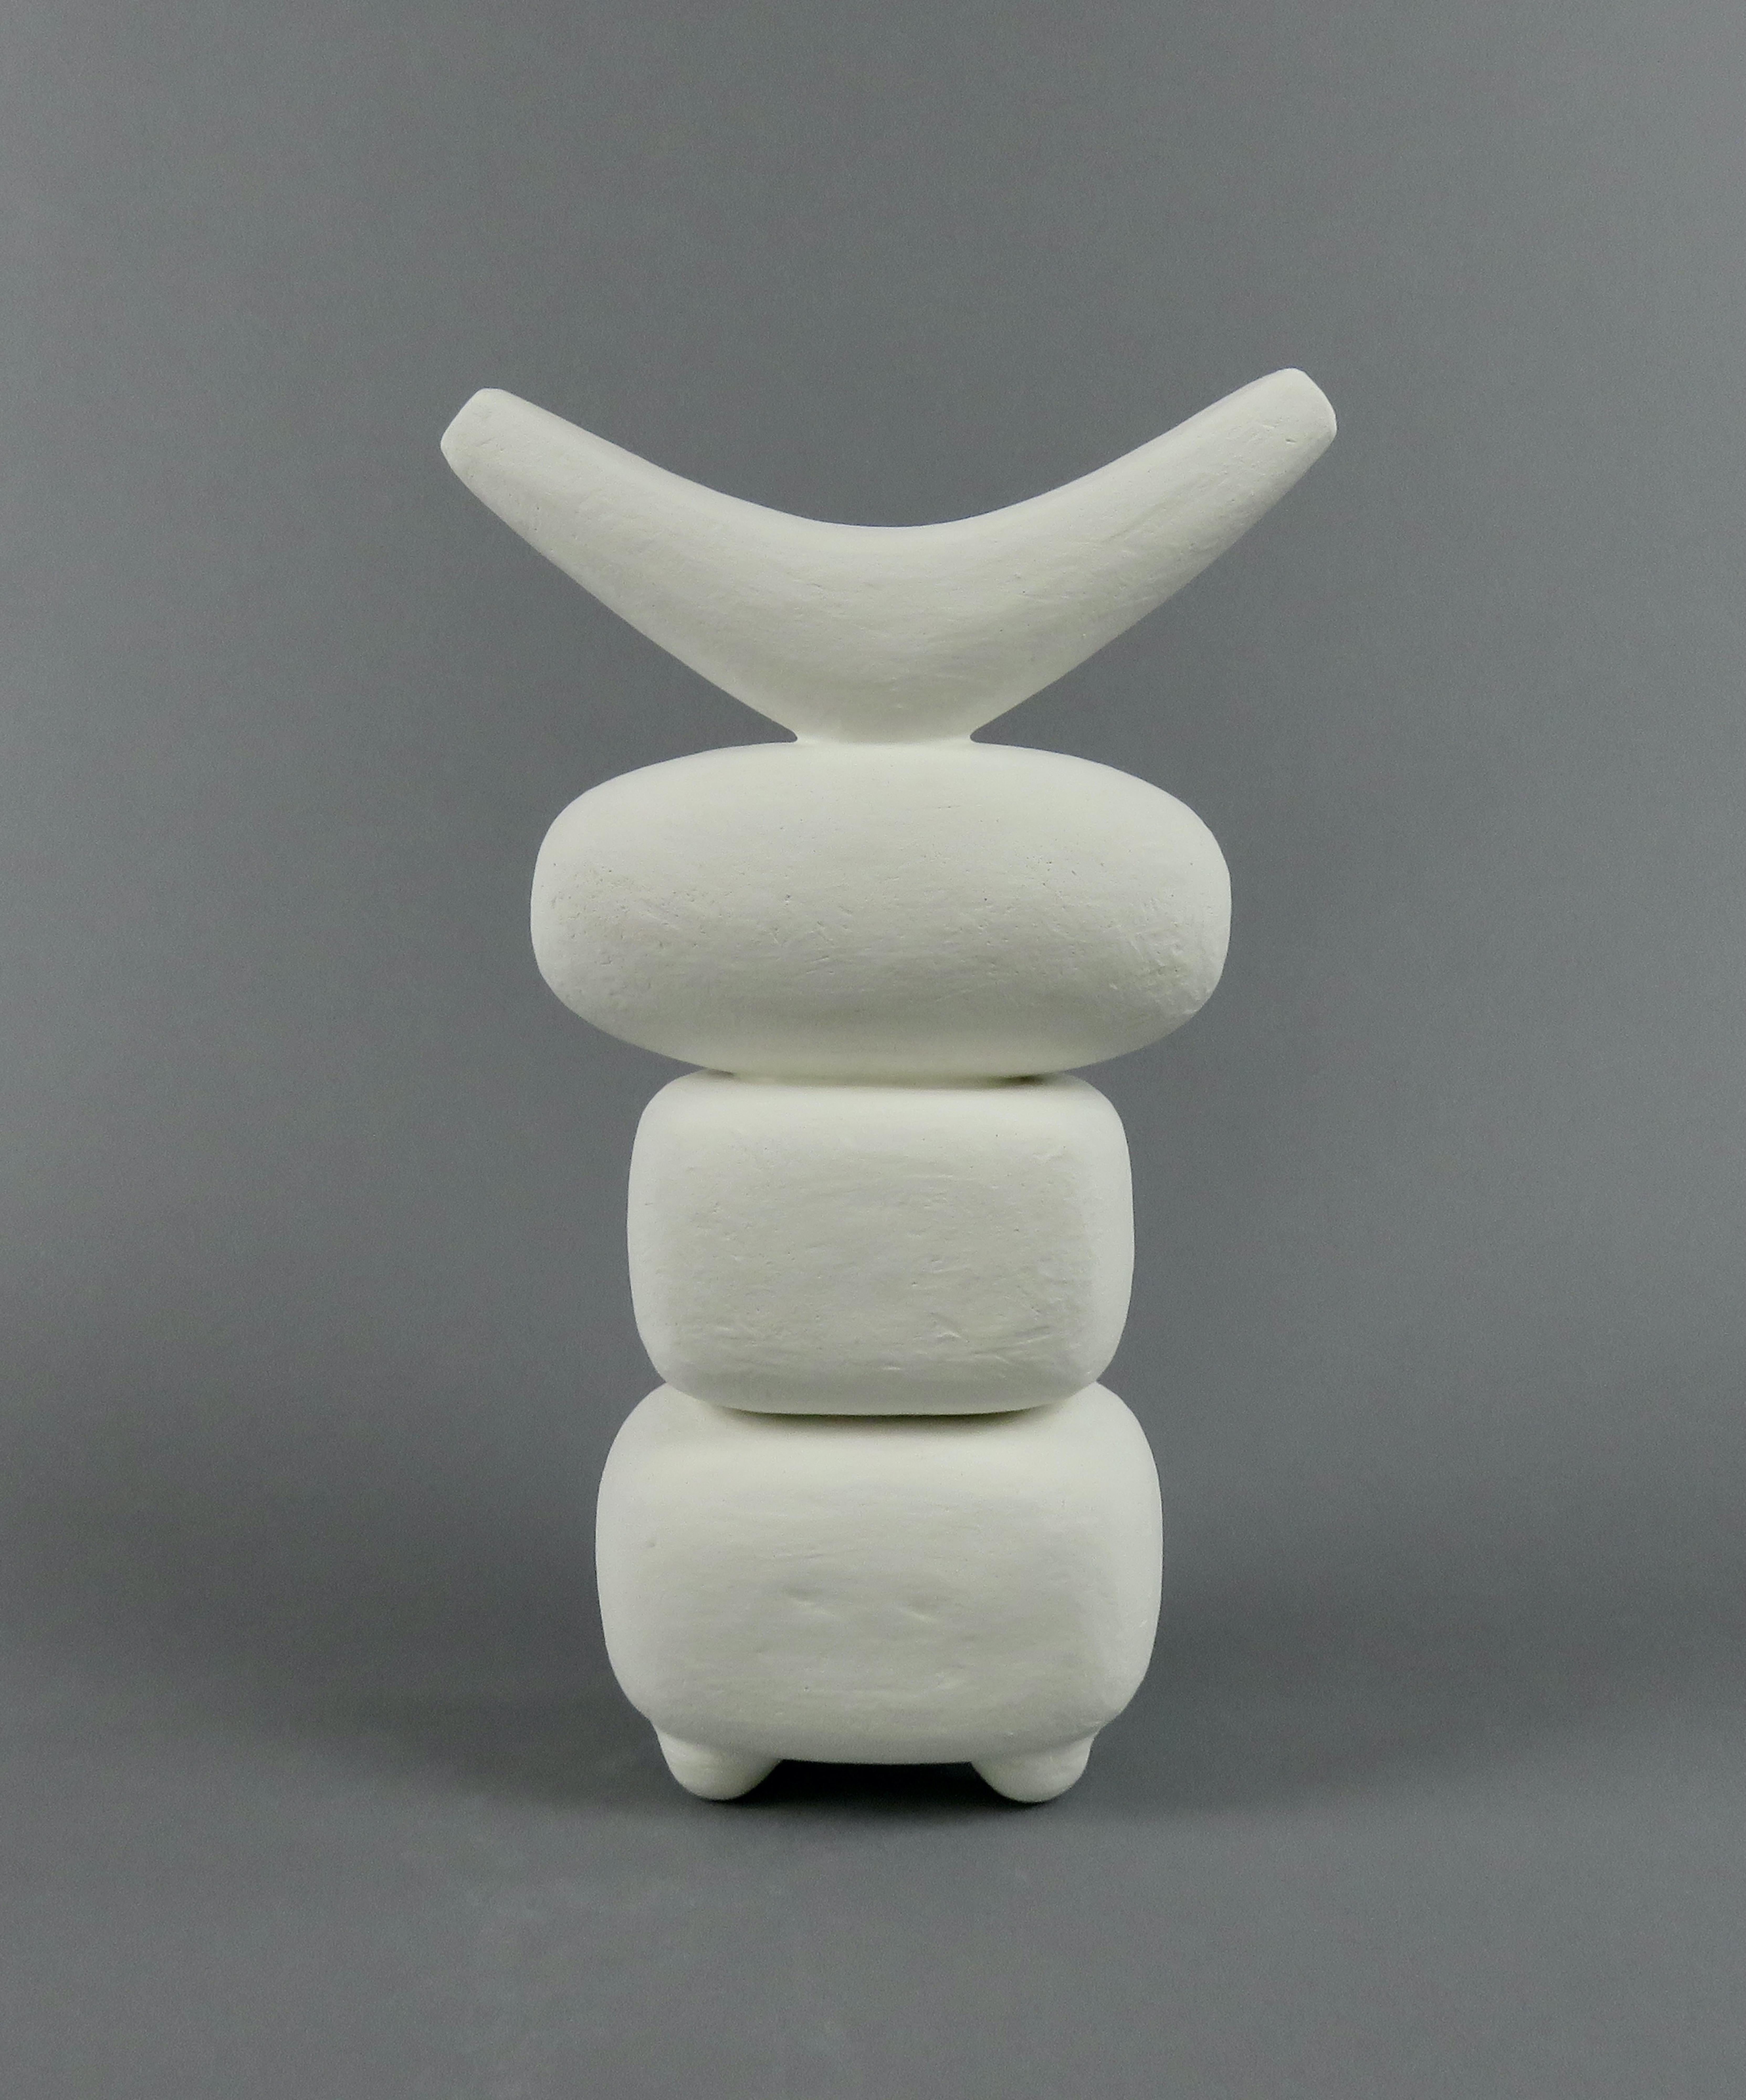 A tall, hand built ceramic Modern TOTEM, created by artist Helena Starcevic, this is one in an ongoing study of the totemic form. Here, there are 4 separate parts hand-formed and attached with 4 small feet. The specially formed and angled top is